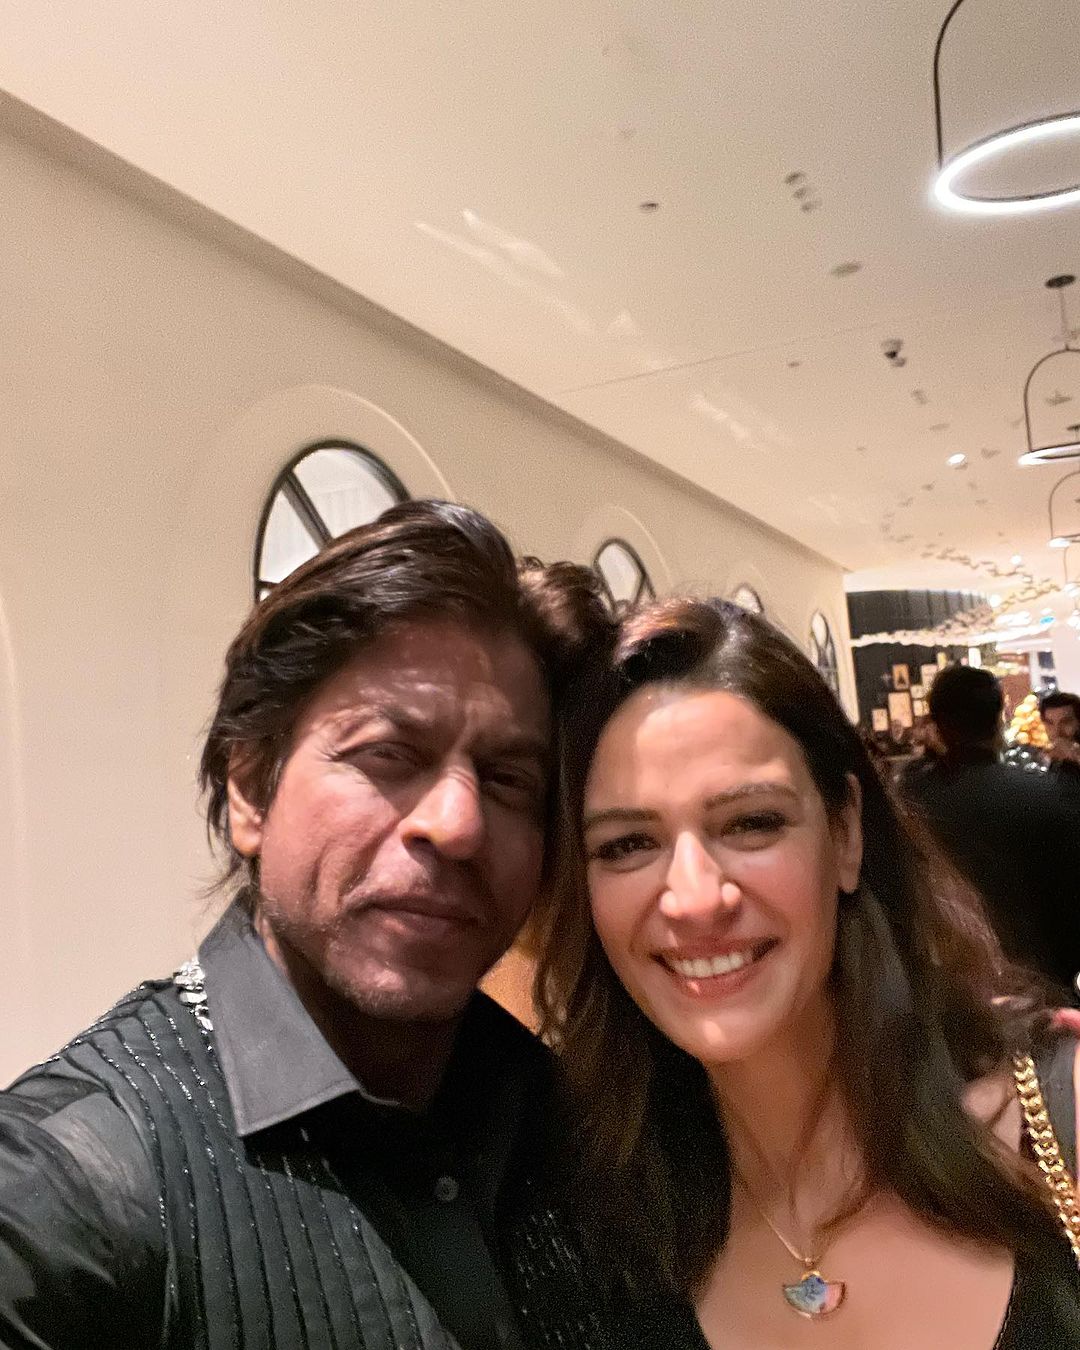 Actress Mona Singh Shared Her Pictures With Bollywood Super Star Shah Rukh Khan On Instagram From His 58th Birthday Bash.   